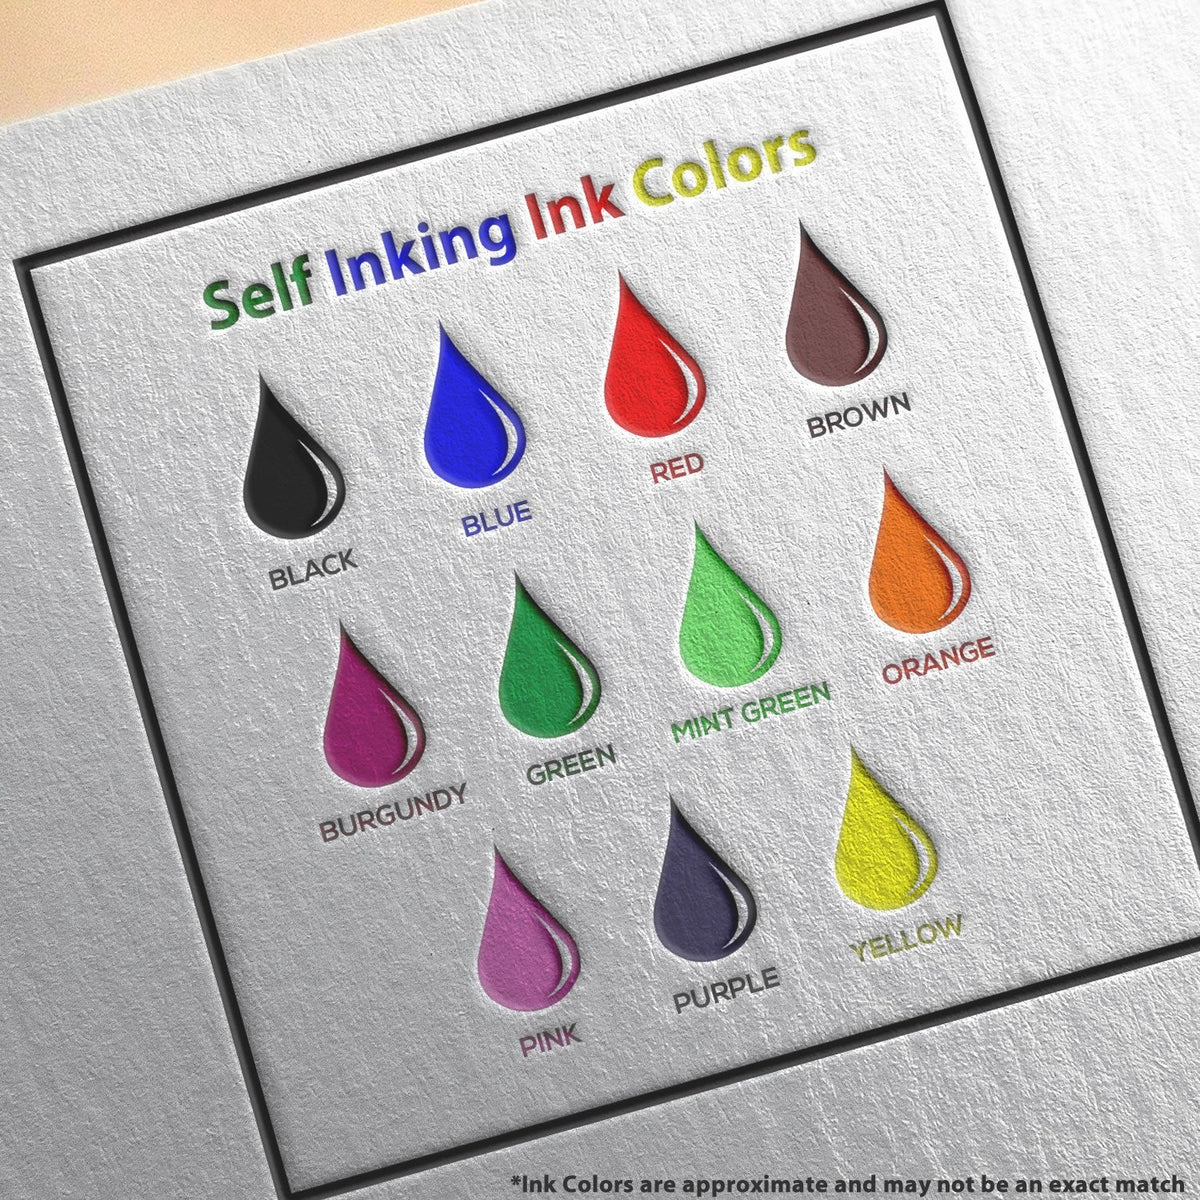 Self-Inking Round Copy Copy Copy Stamp Ink Color Options